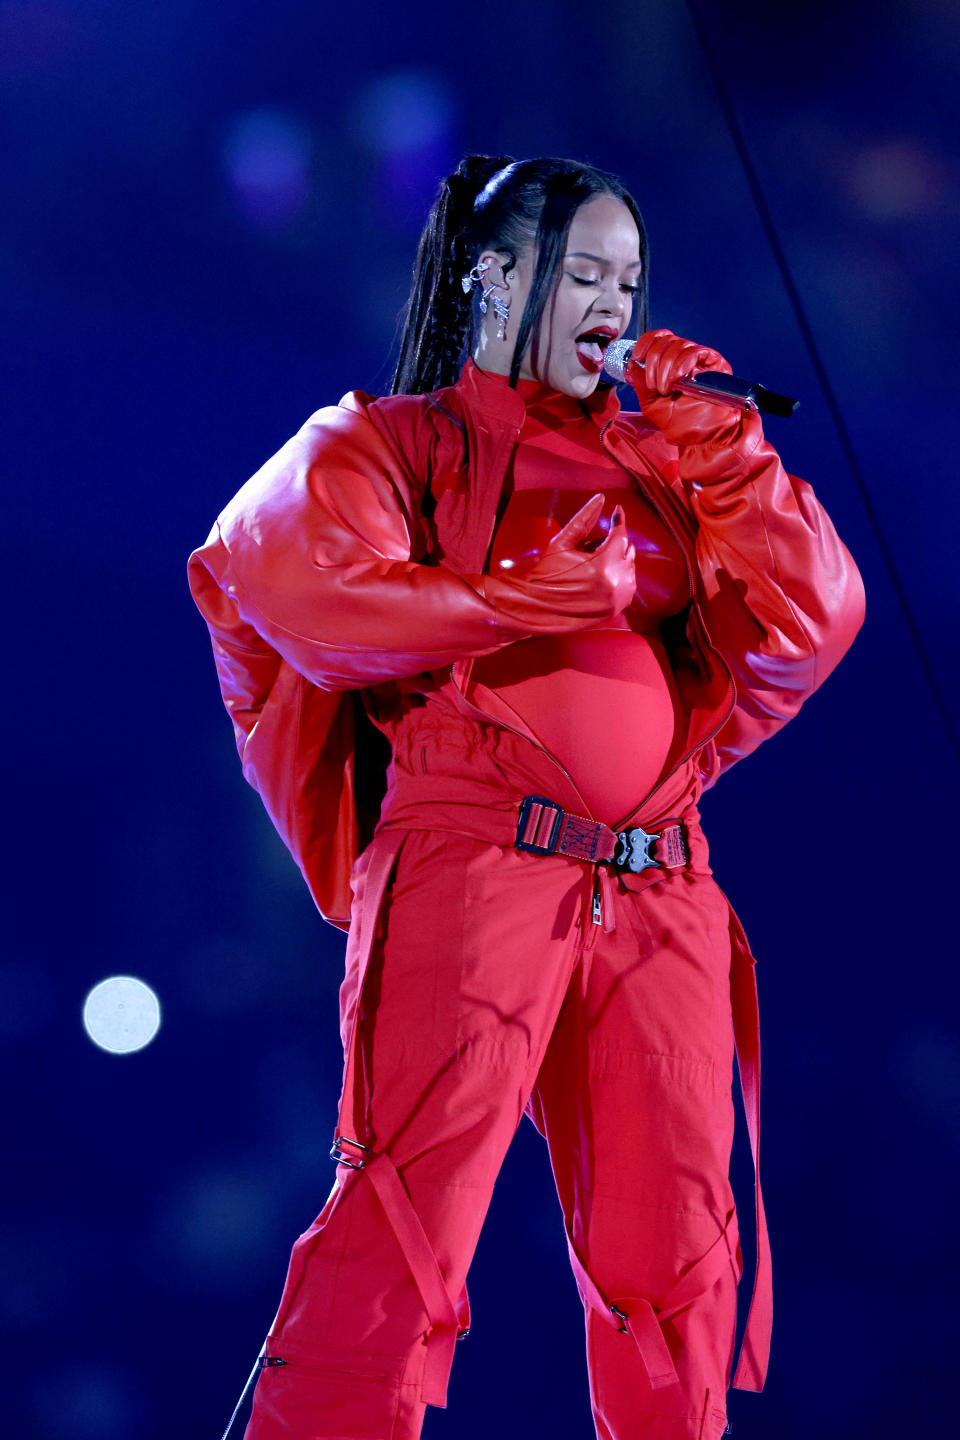 Rihanna Unveiled A Baby Bump During Her Super Bowl Halftime Performance